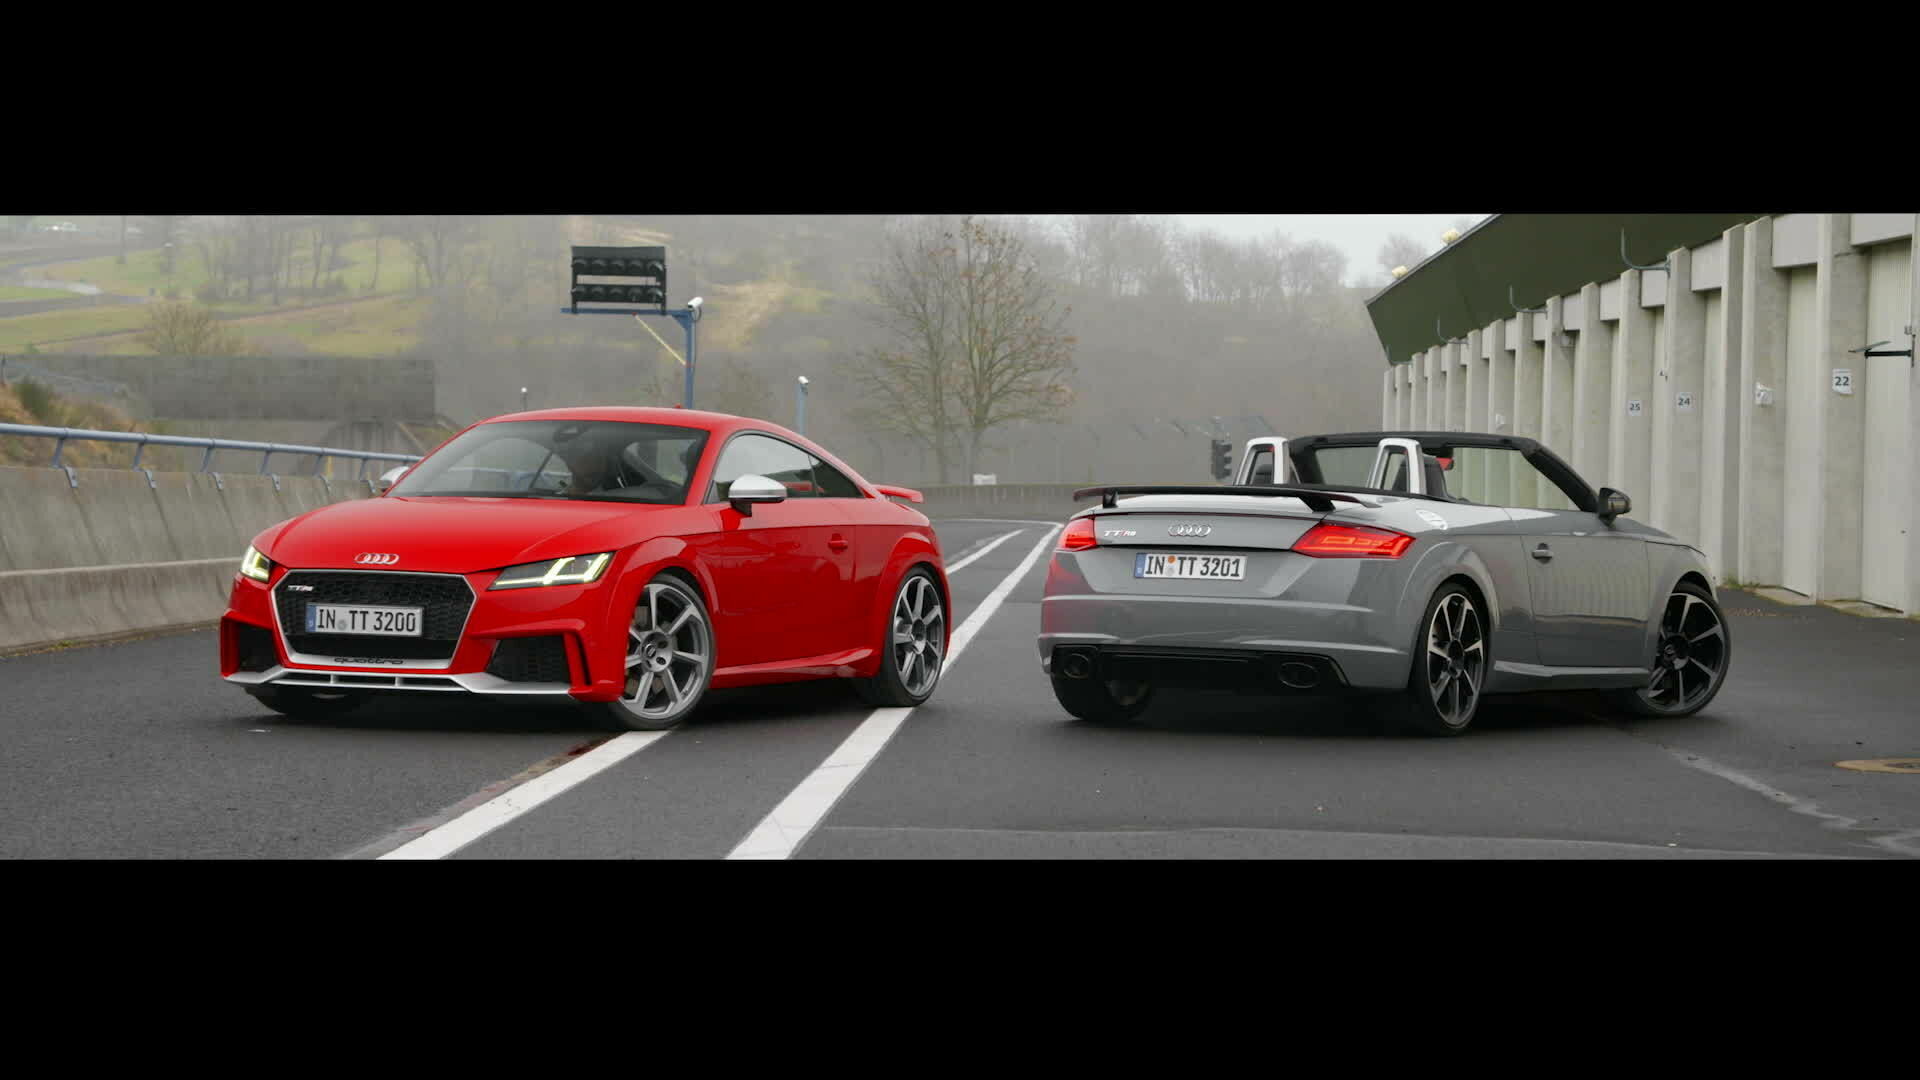 TT RS Coupé and TT RS Roadster (2016)